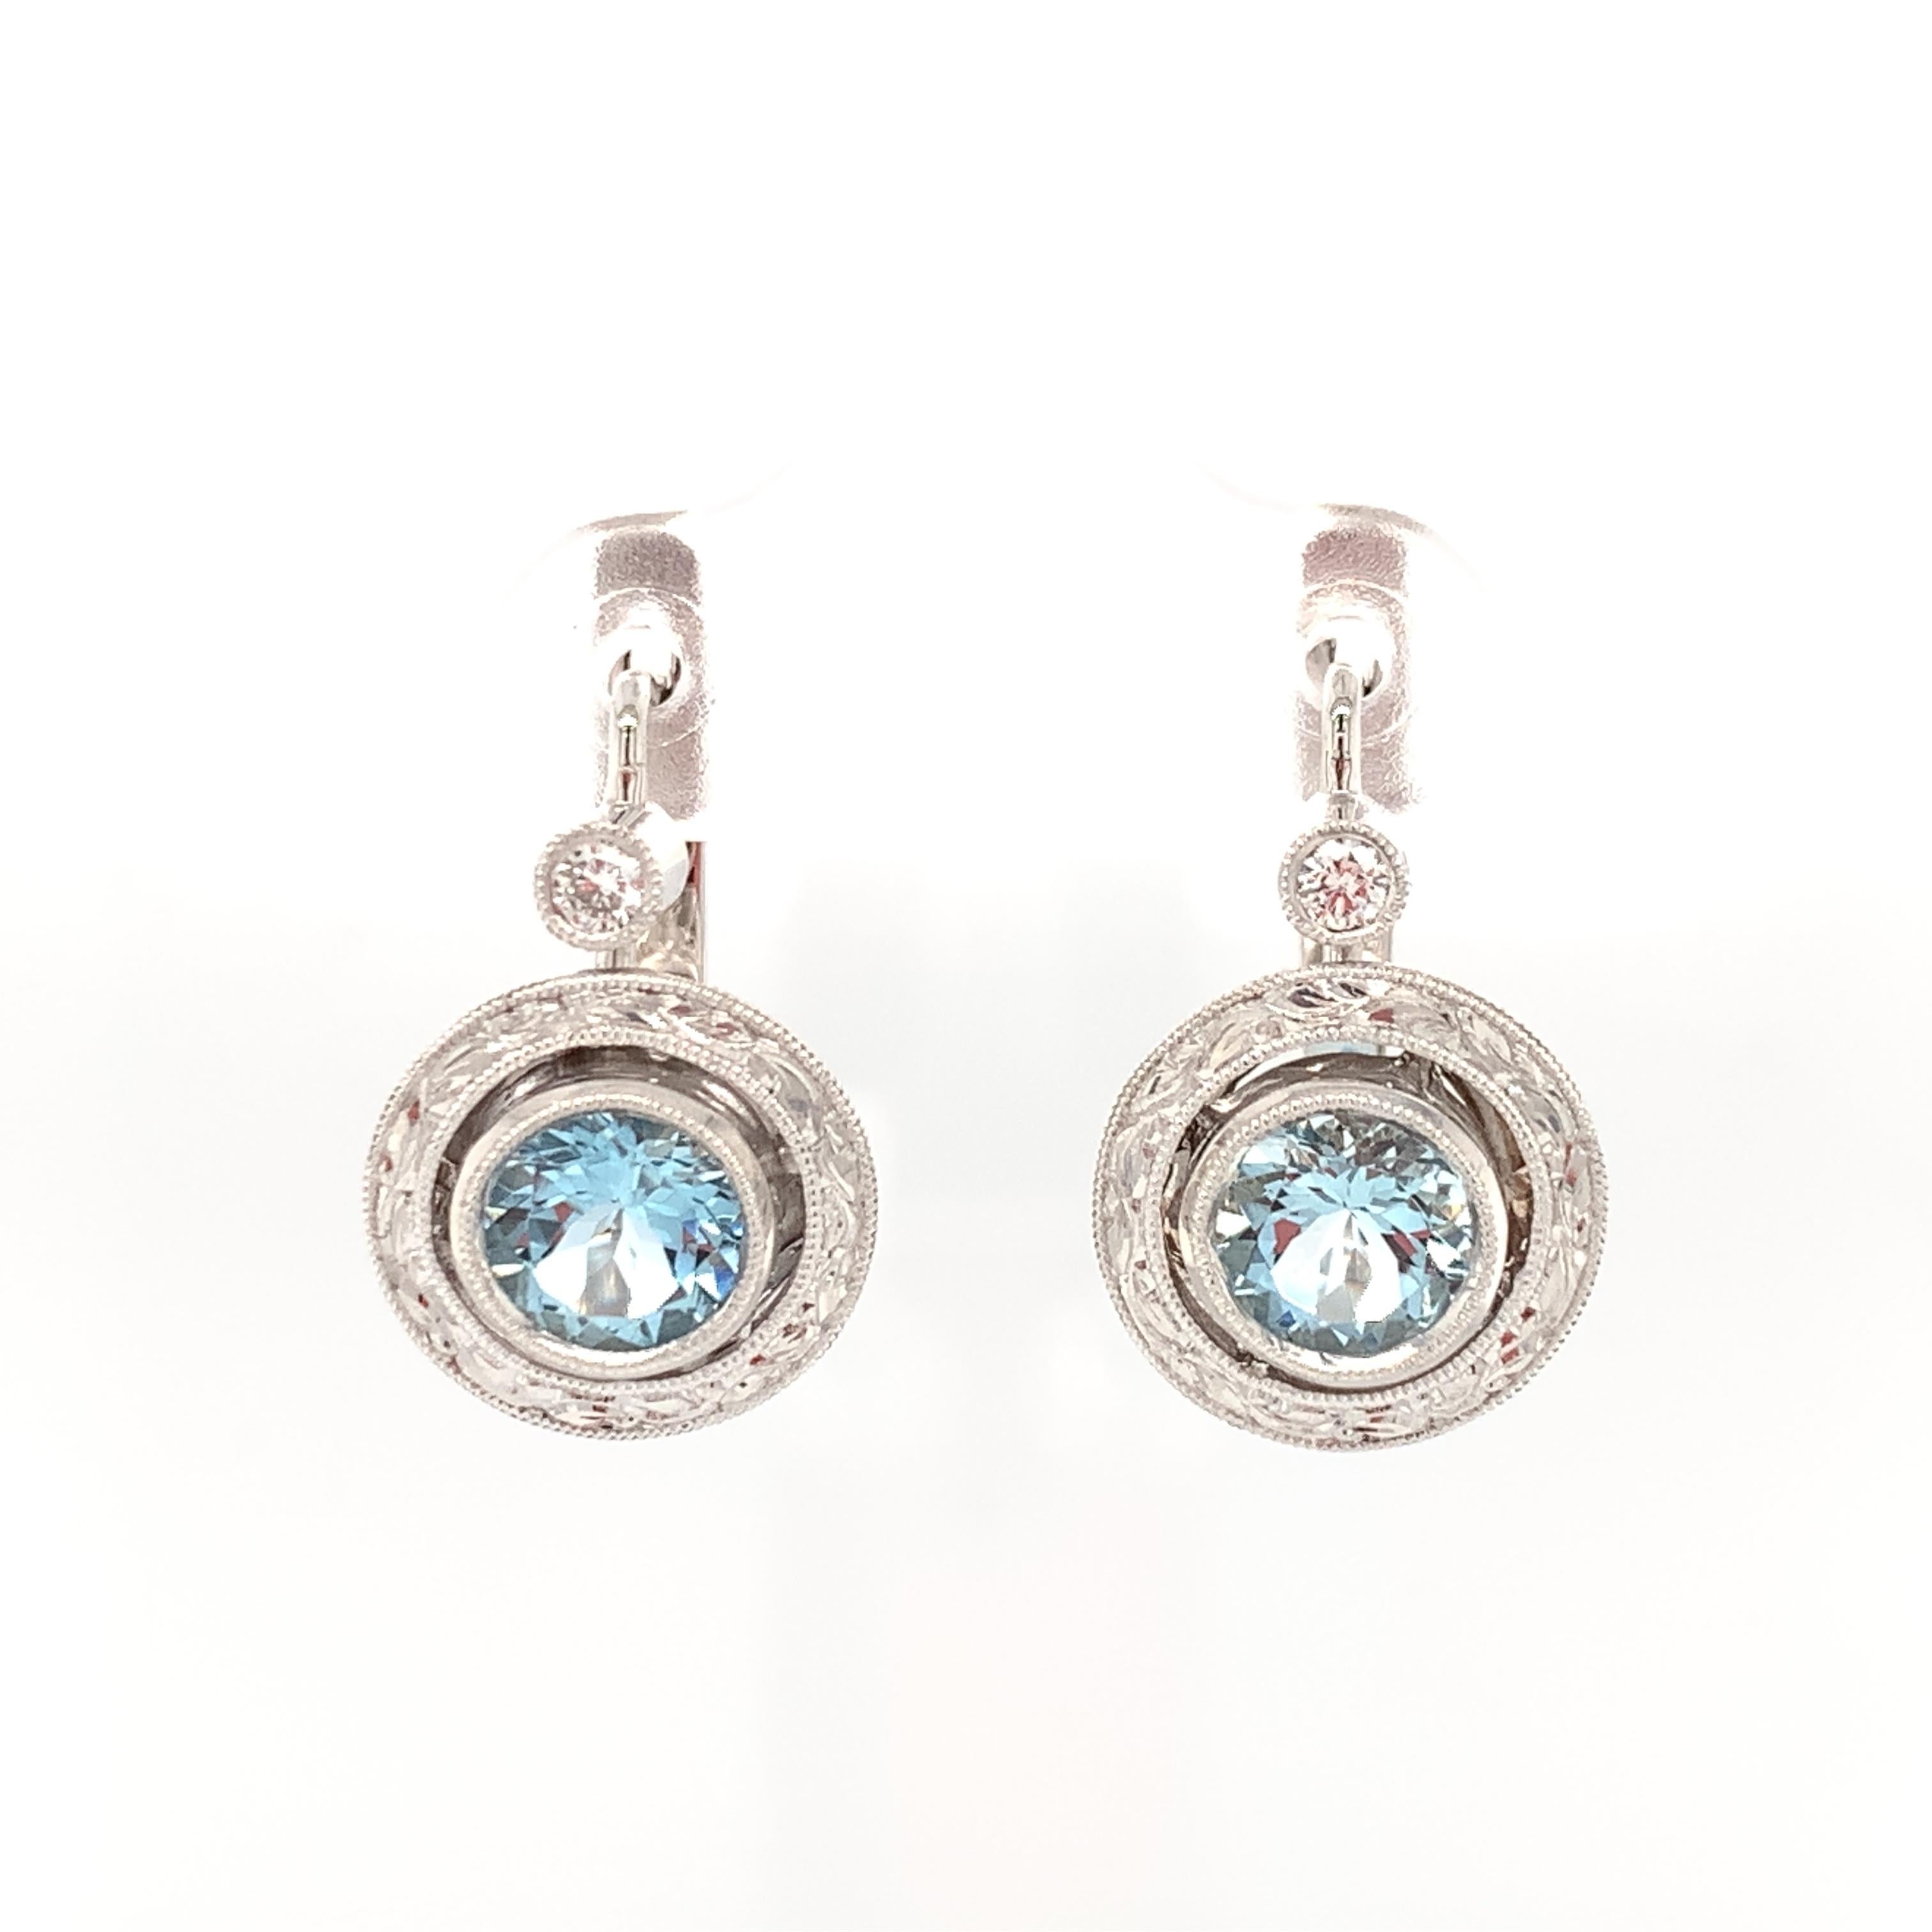 These lever back earrings feature brilliant powder blue aquamarines and sparkling diamonds set in beautifully engraved 18k white golds bezels. This is one of our most popular signature designs, handcrafted by our Master Jewelers in Los Angeles.